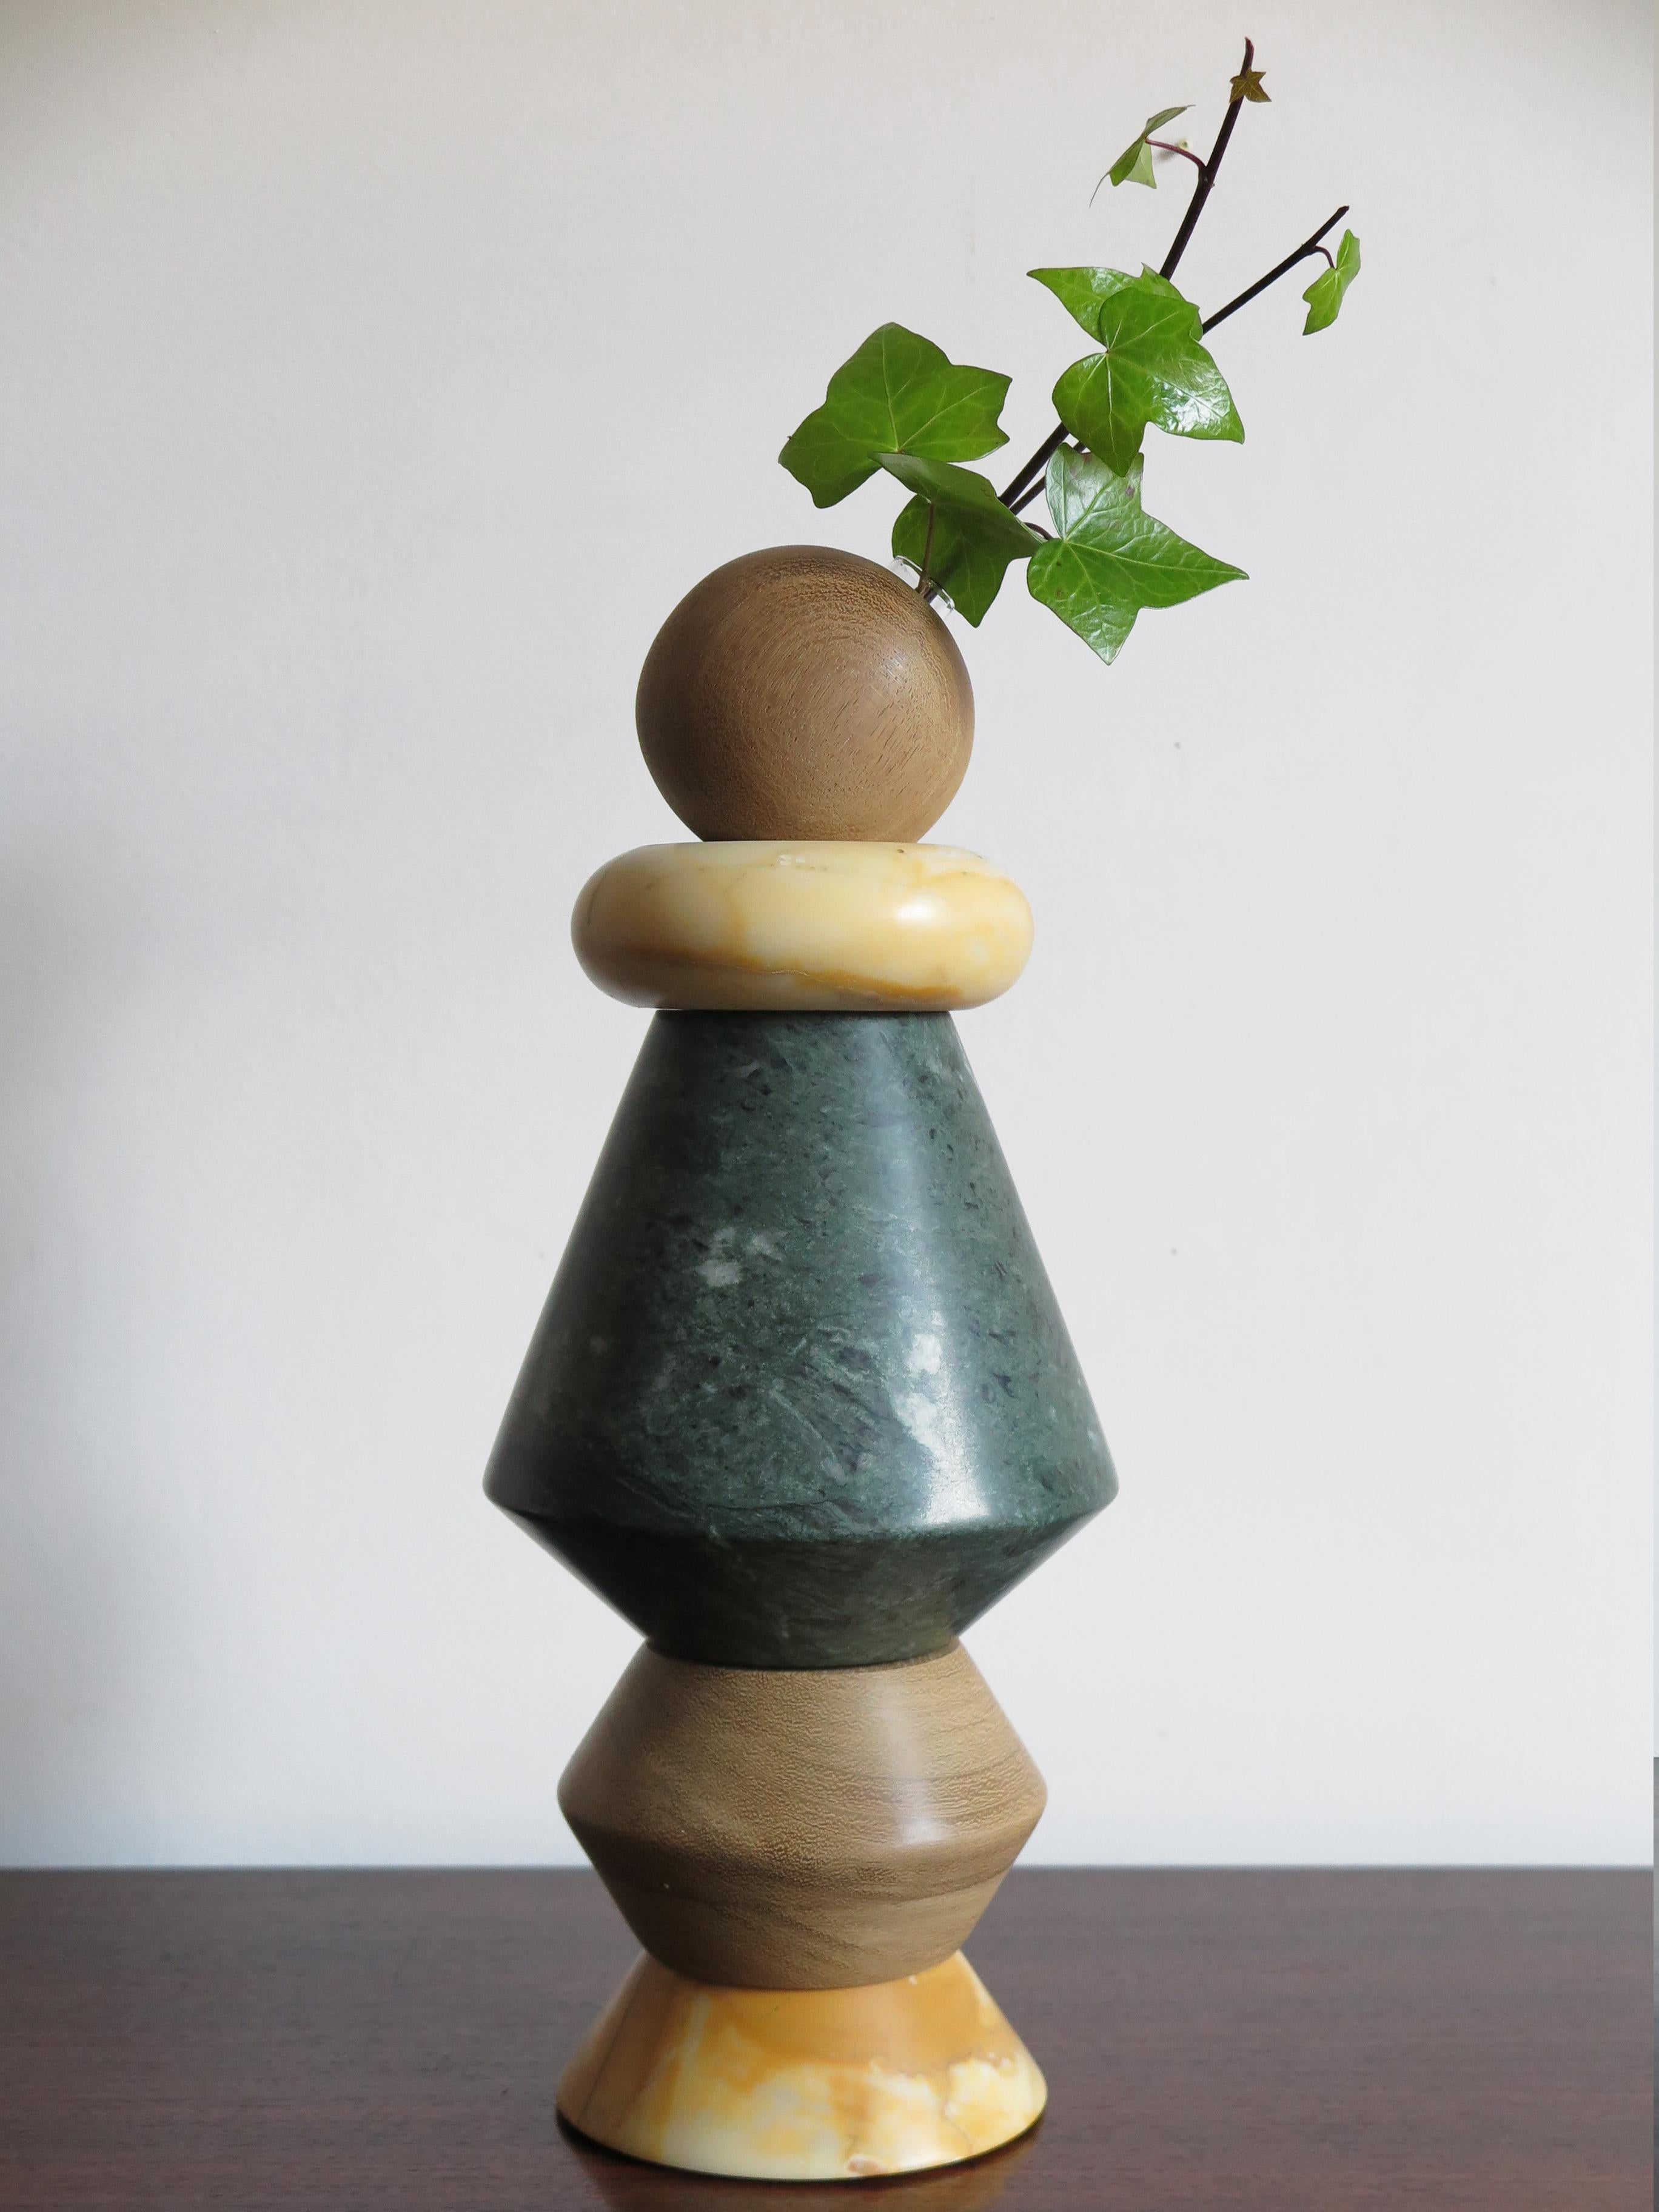 Large sculpture, candle holder and flower vase, modular as you like made up of
Verde Alpi and Giallo Siena marbles, and solid wood with including glass tubes for fresh flowers.
New design Capperidicasa

Designed for large, contemporary and